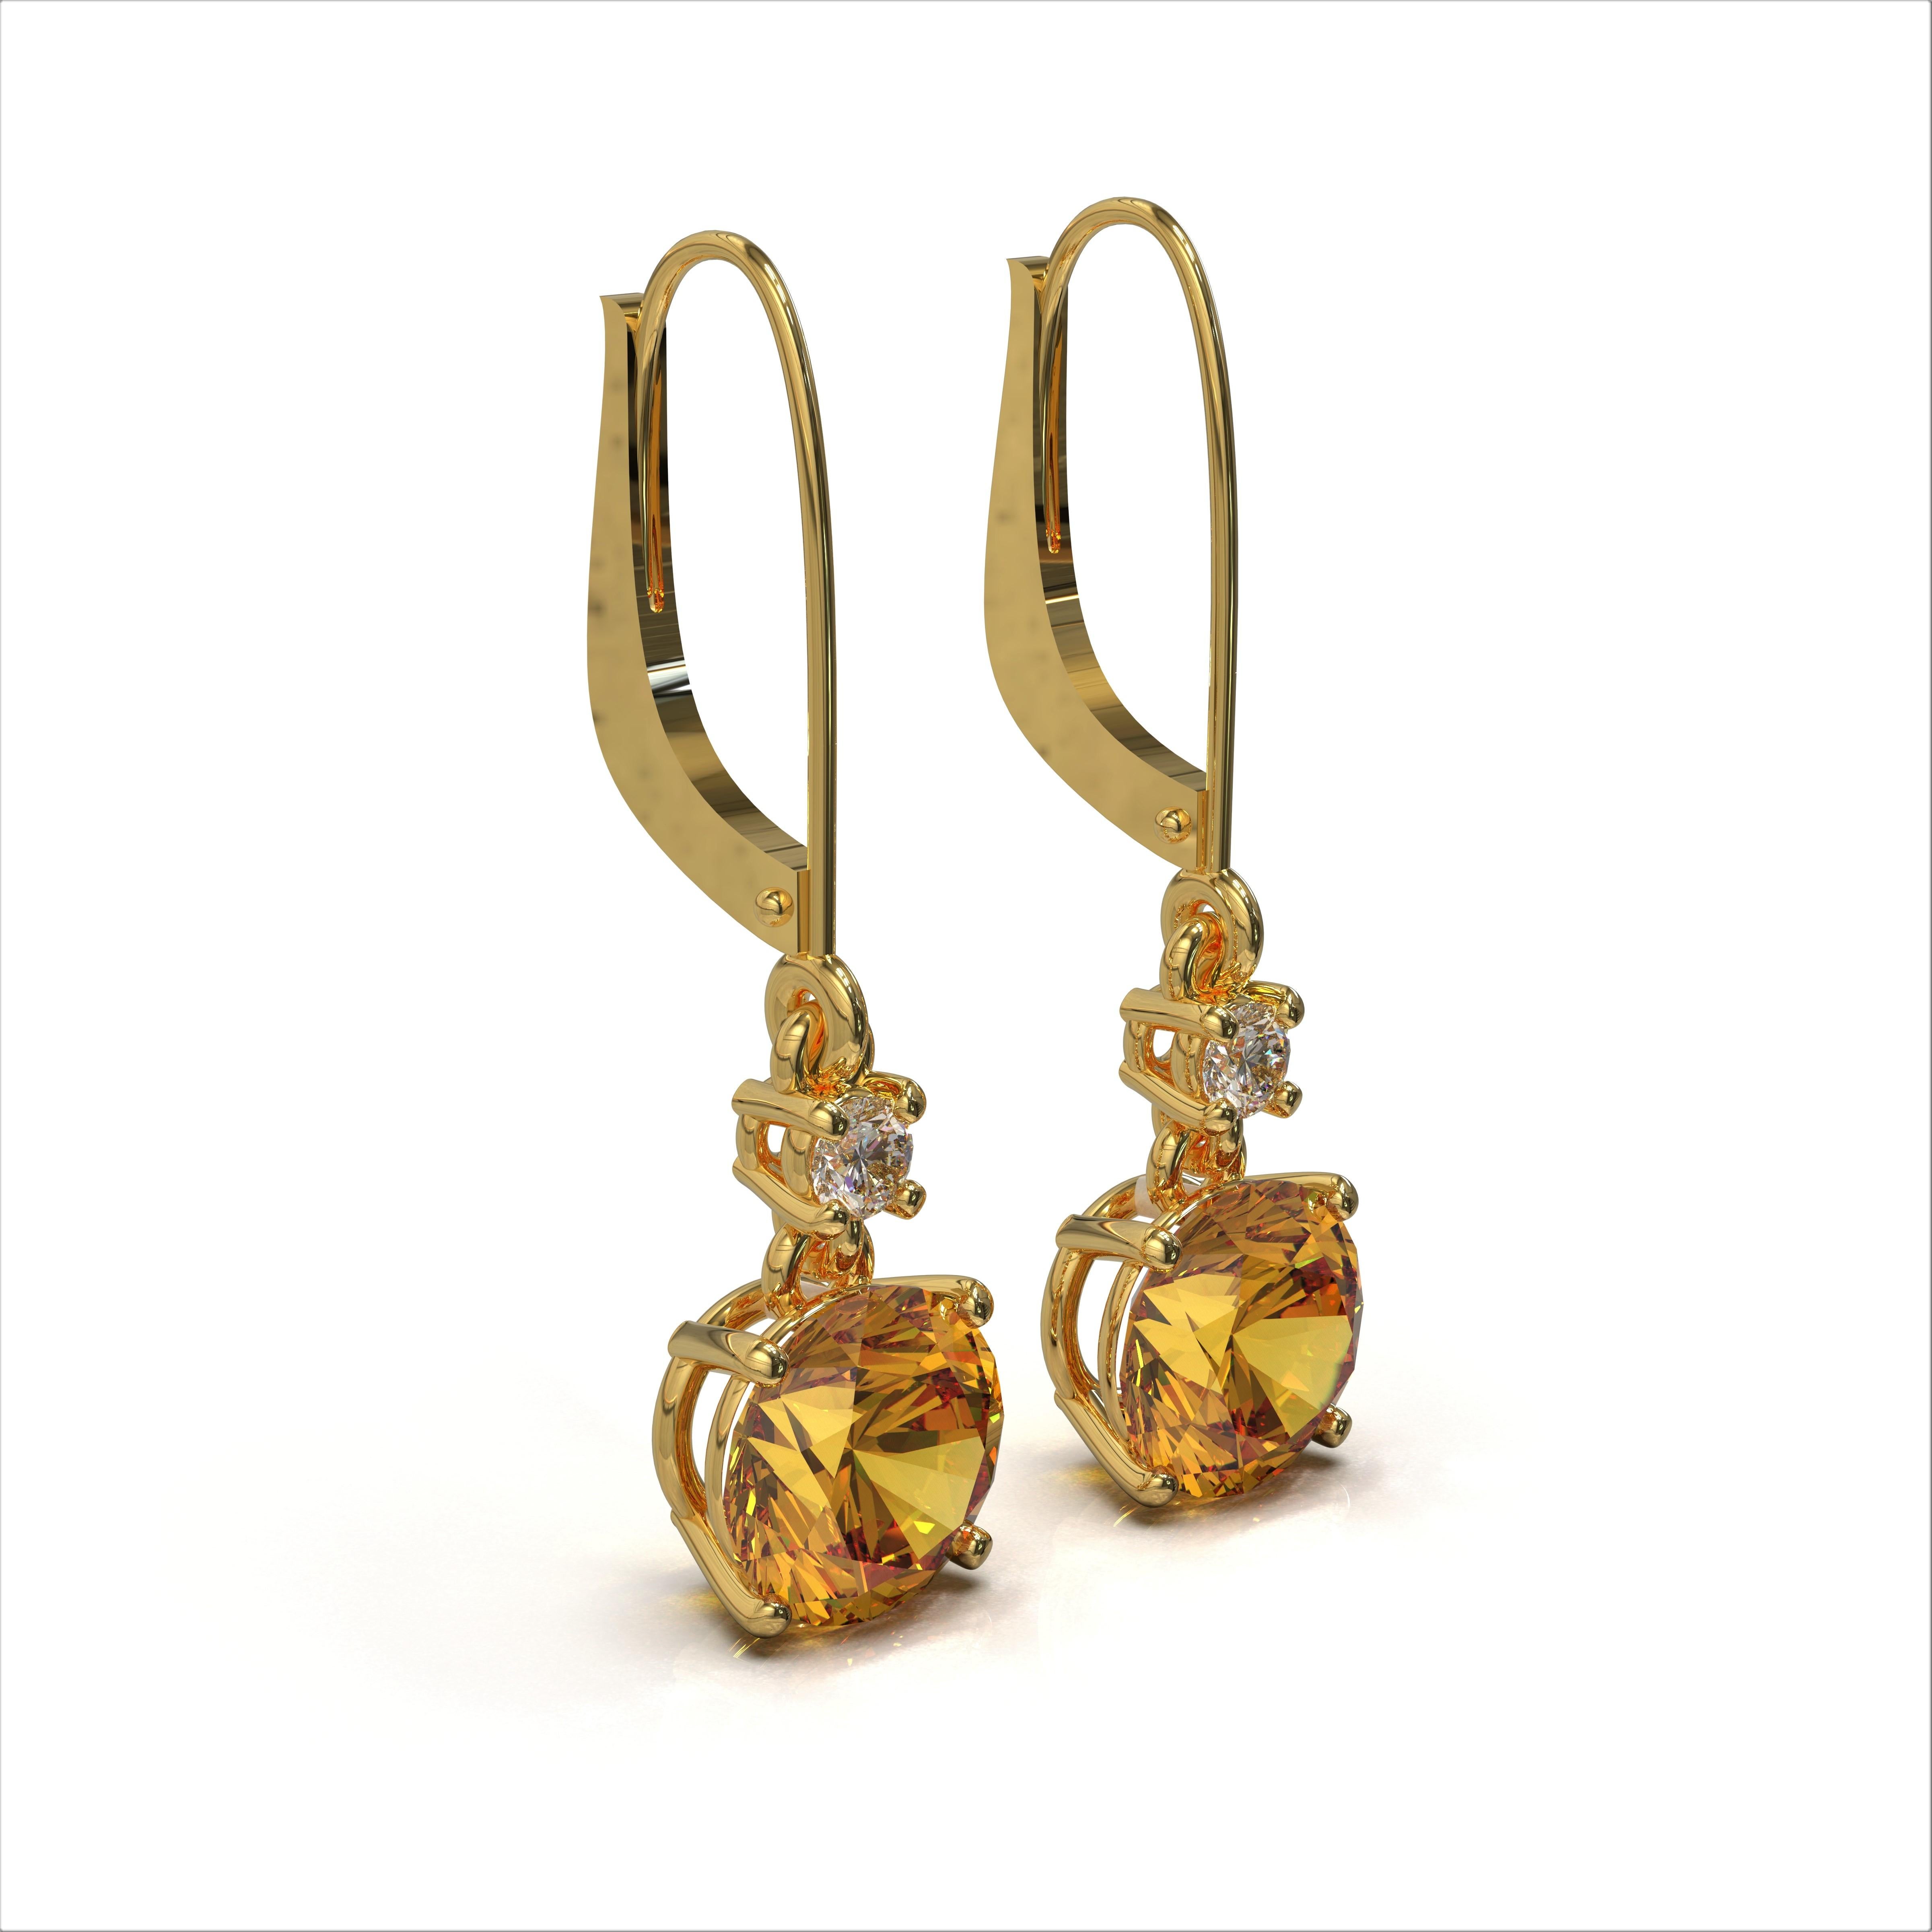 orecchini di berillo giallo

These gorgeous earrings in 18ct yellow gold feature a pair of lovely Beryl each suspended from a finest white diamond and ultra-safe lever back earring findings.

2 Round yellow Beryl: 3.40 carat Total Weight  Intense